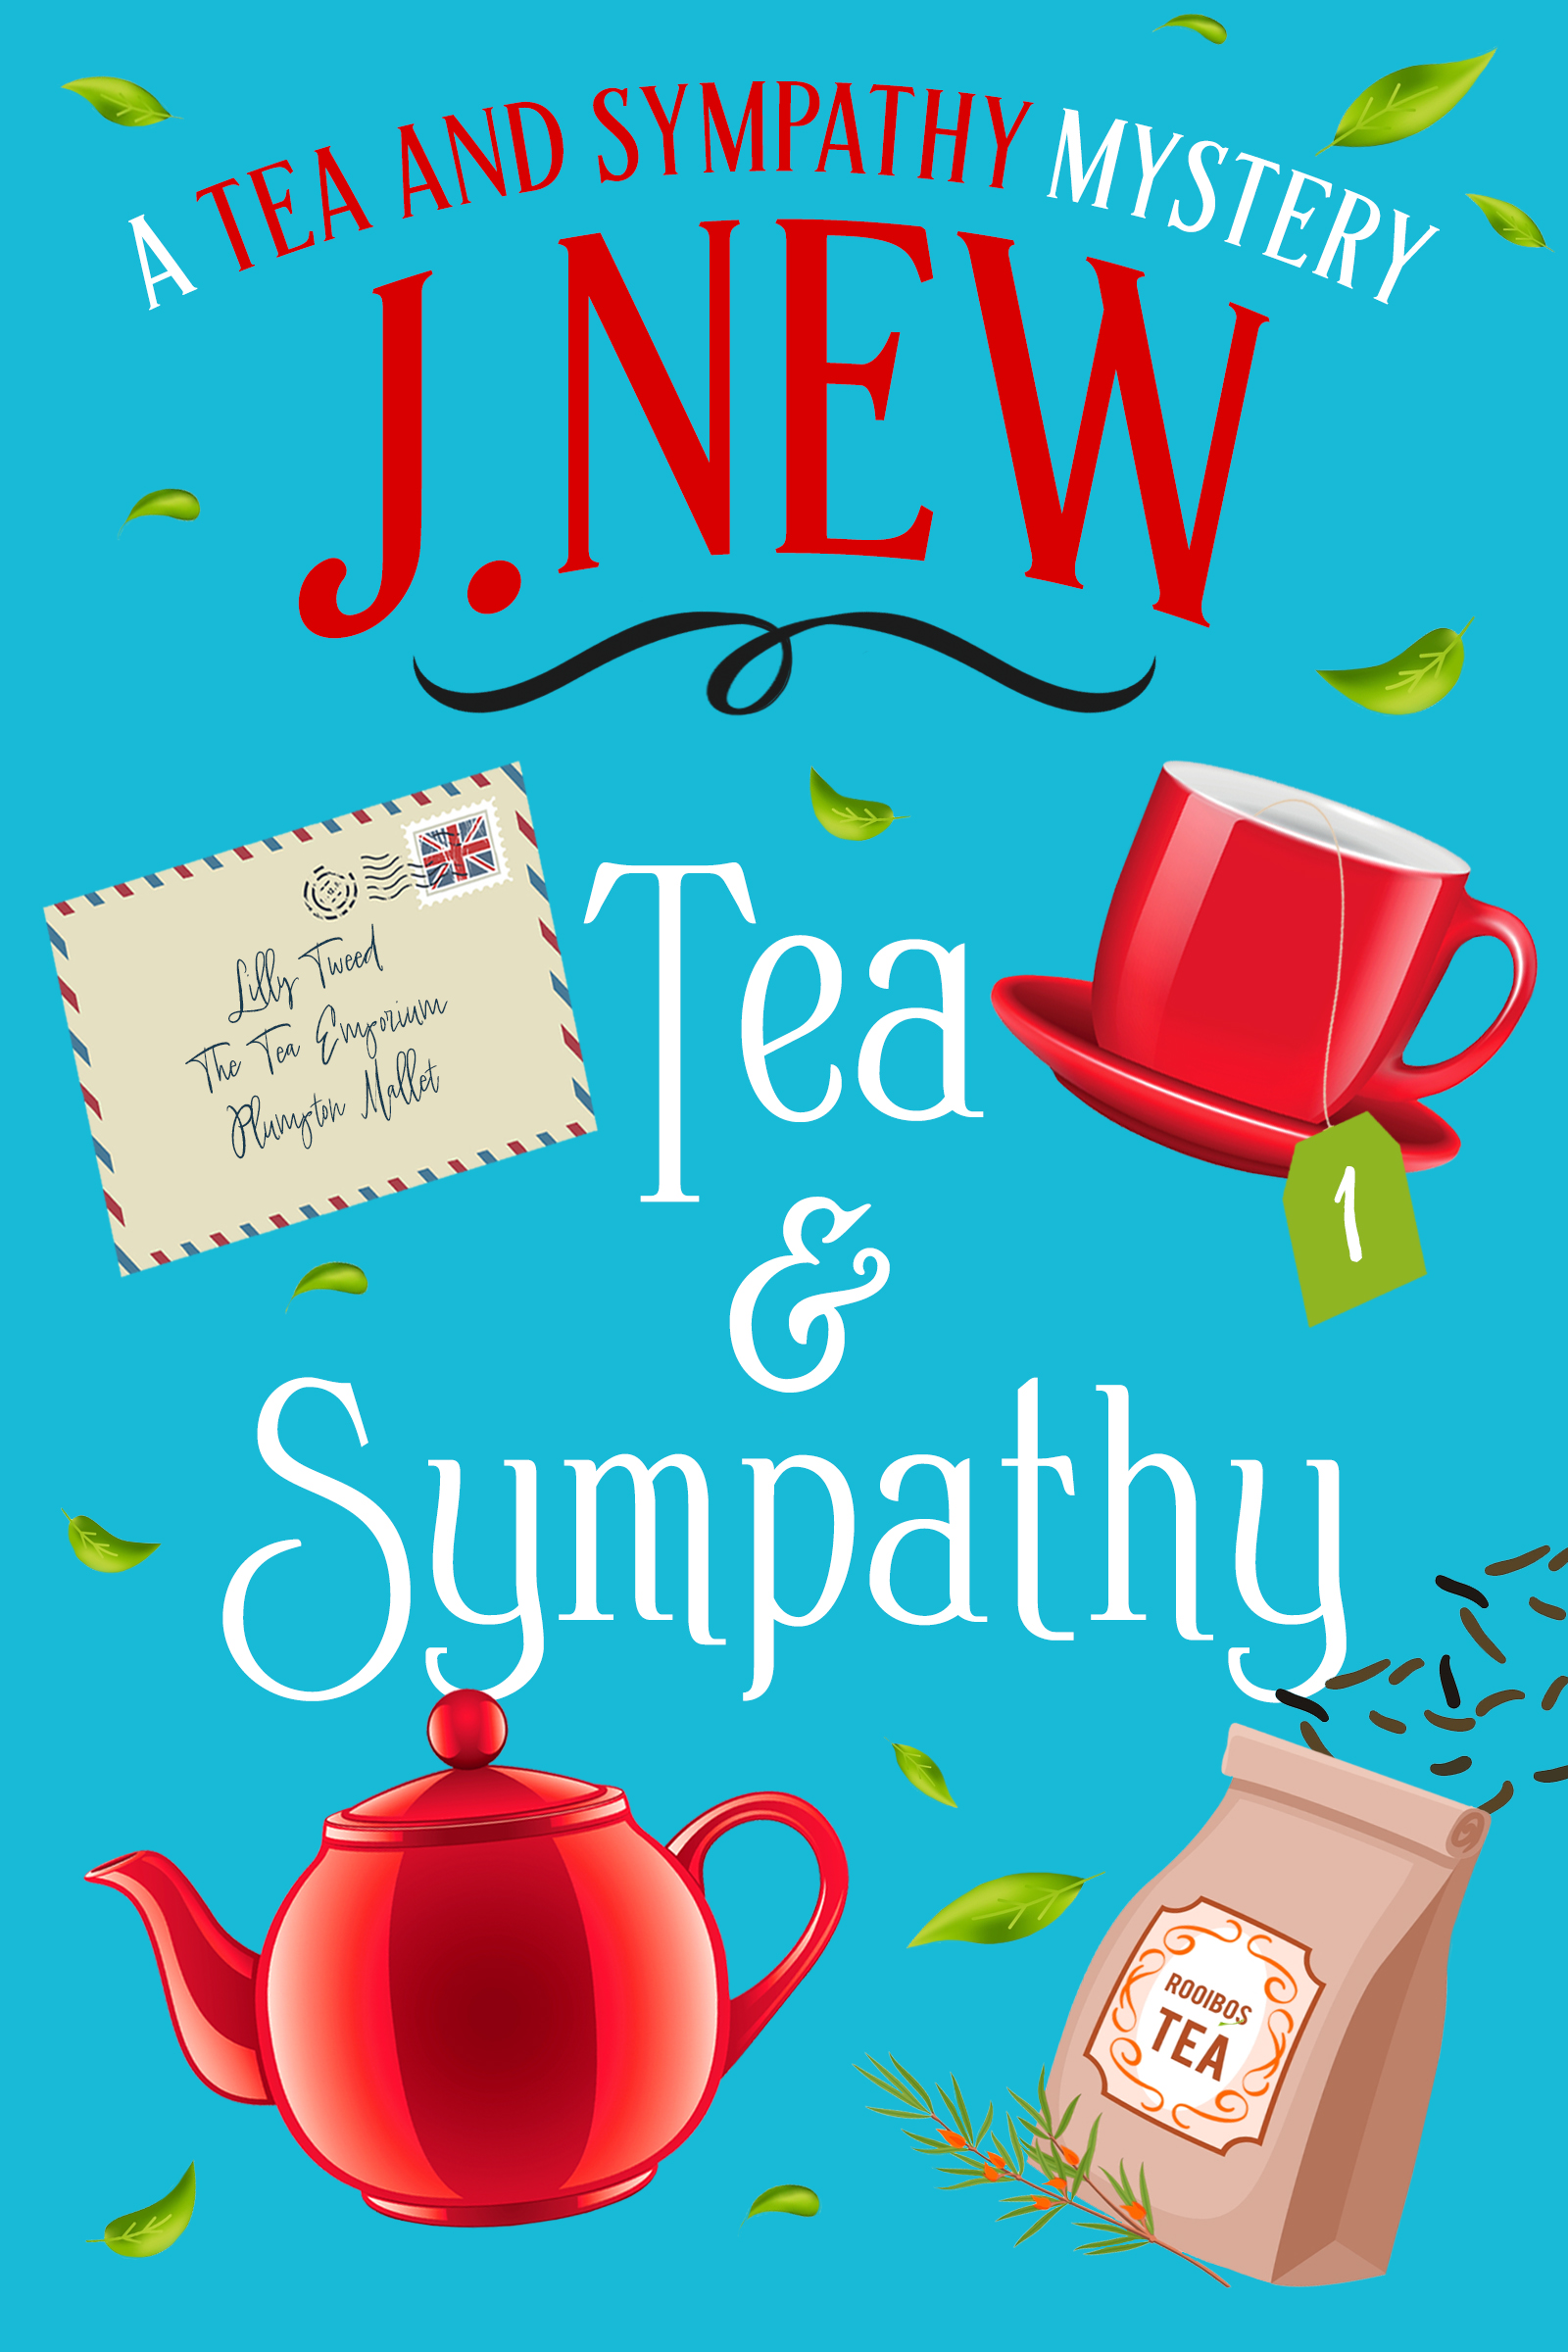 Tea and Sympathy the first book in the series featuring the popular Lilly Tweed, Former Agony Aunt, Purveyor of Fine Teas, Accidental Sleuth. Popular murder mystery book with tea by British Author J. New